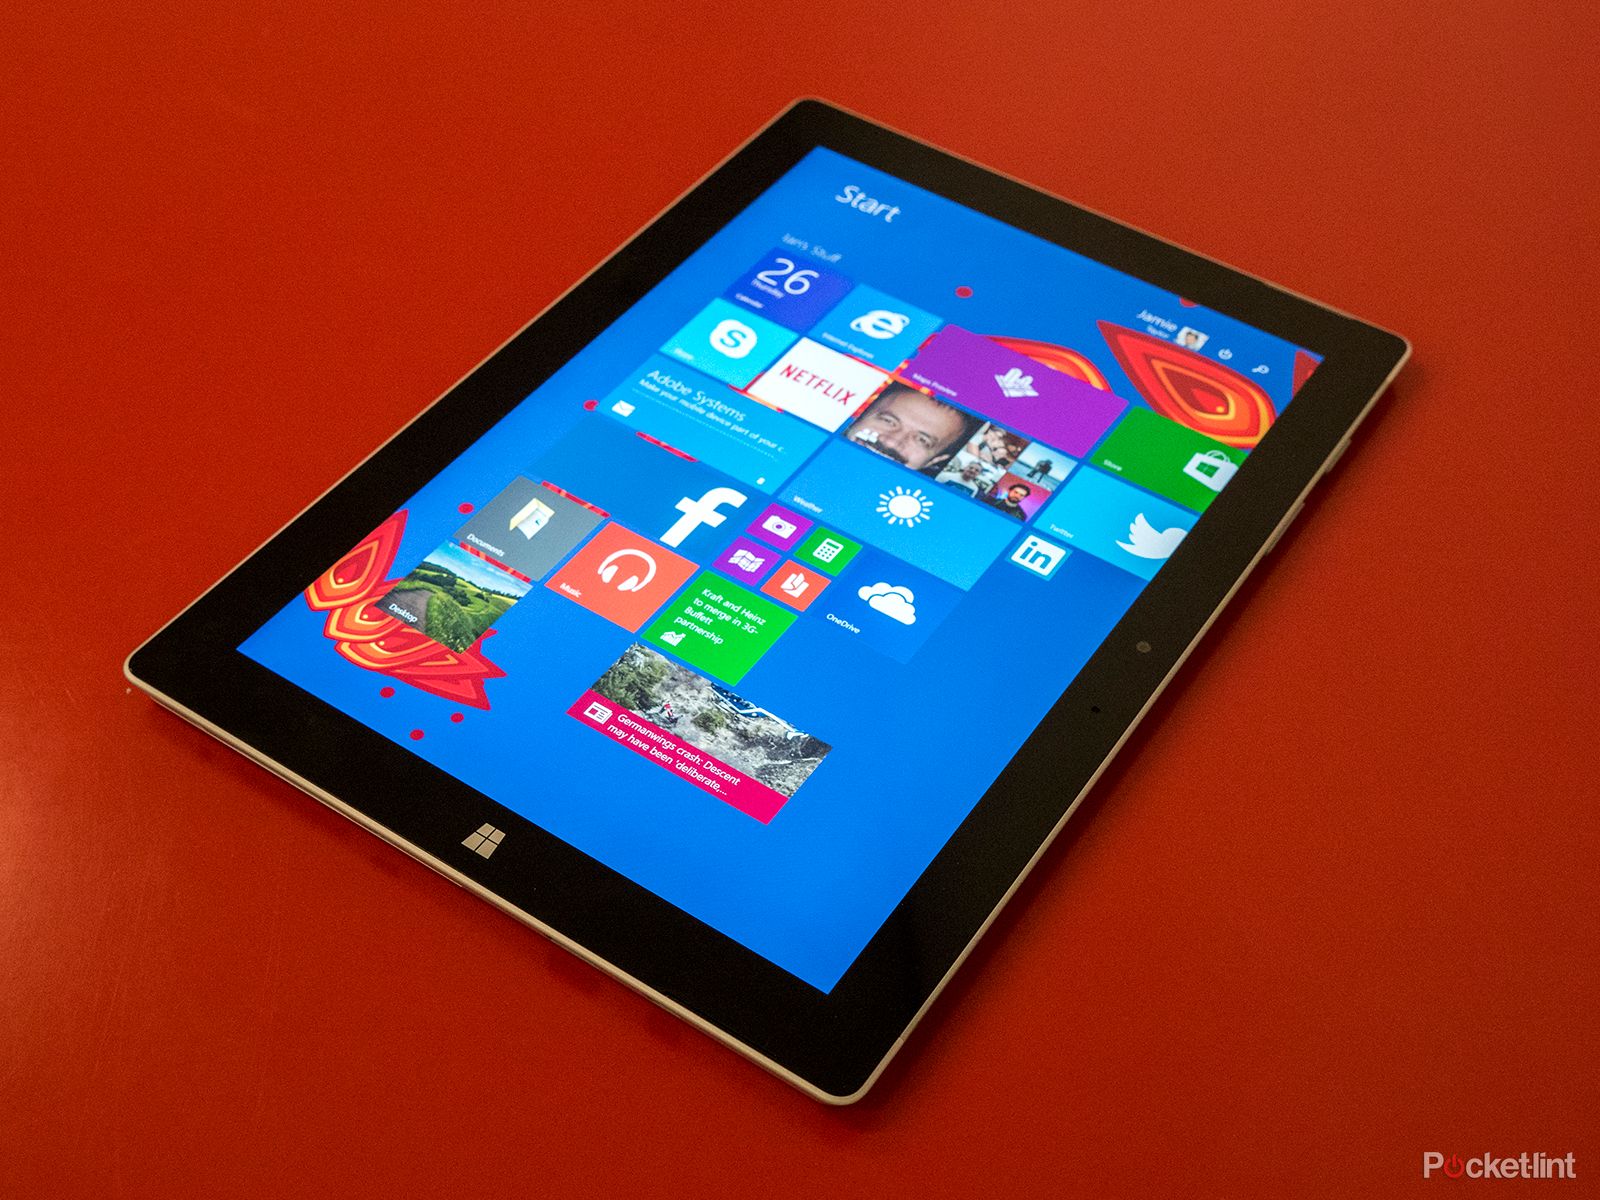 microsoft surface 3 10 8 inch hd screen full windows 8 1 50 cheaper than the pro 3 hands on image 2